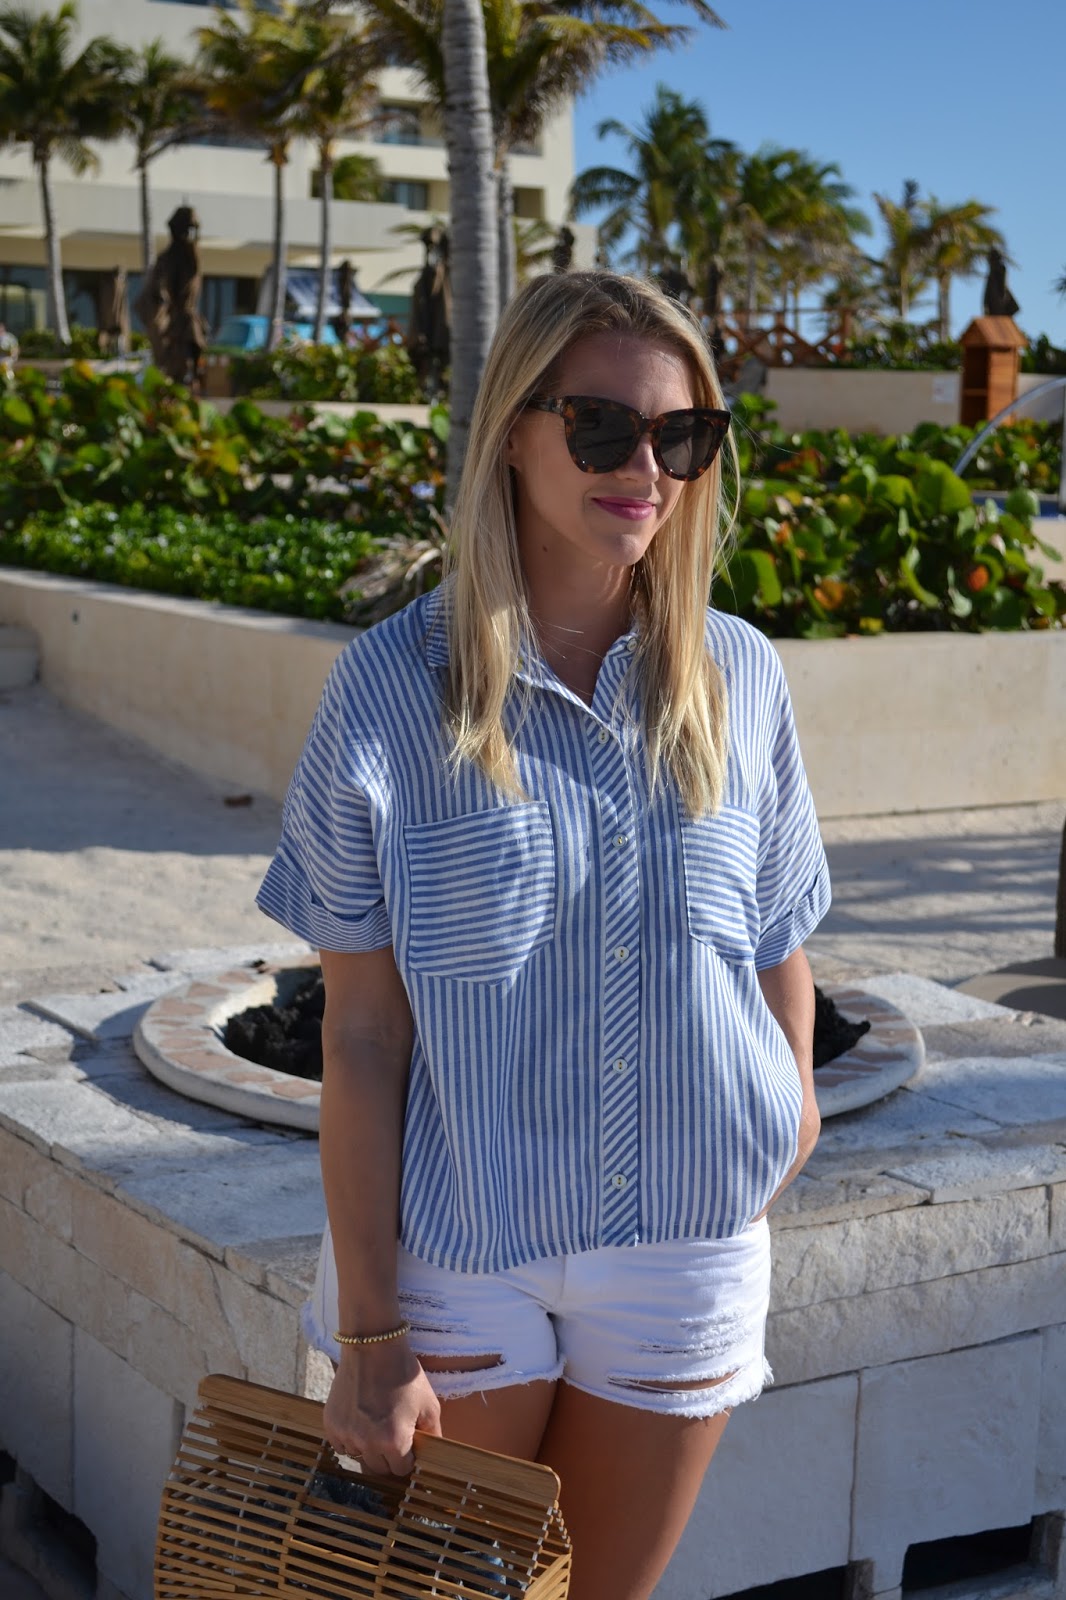 The Fashionably Late Blonde: Spring Stripes